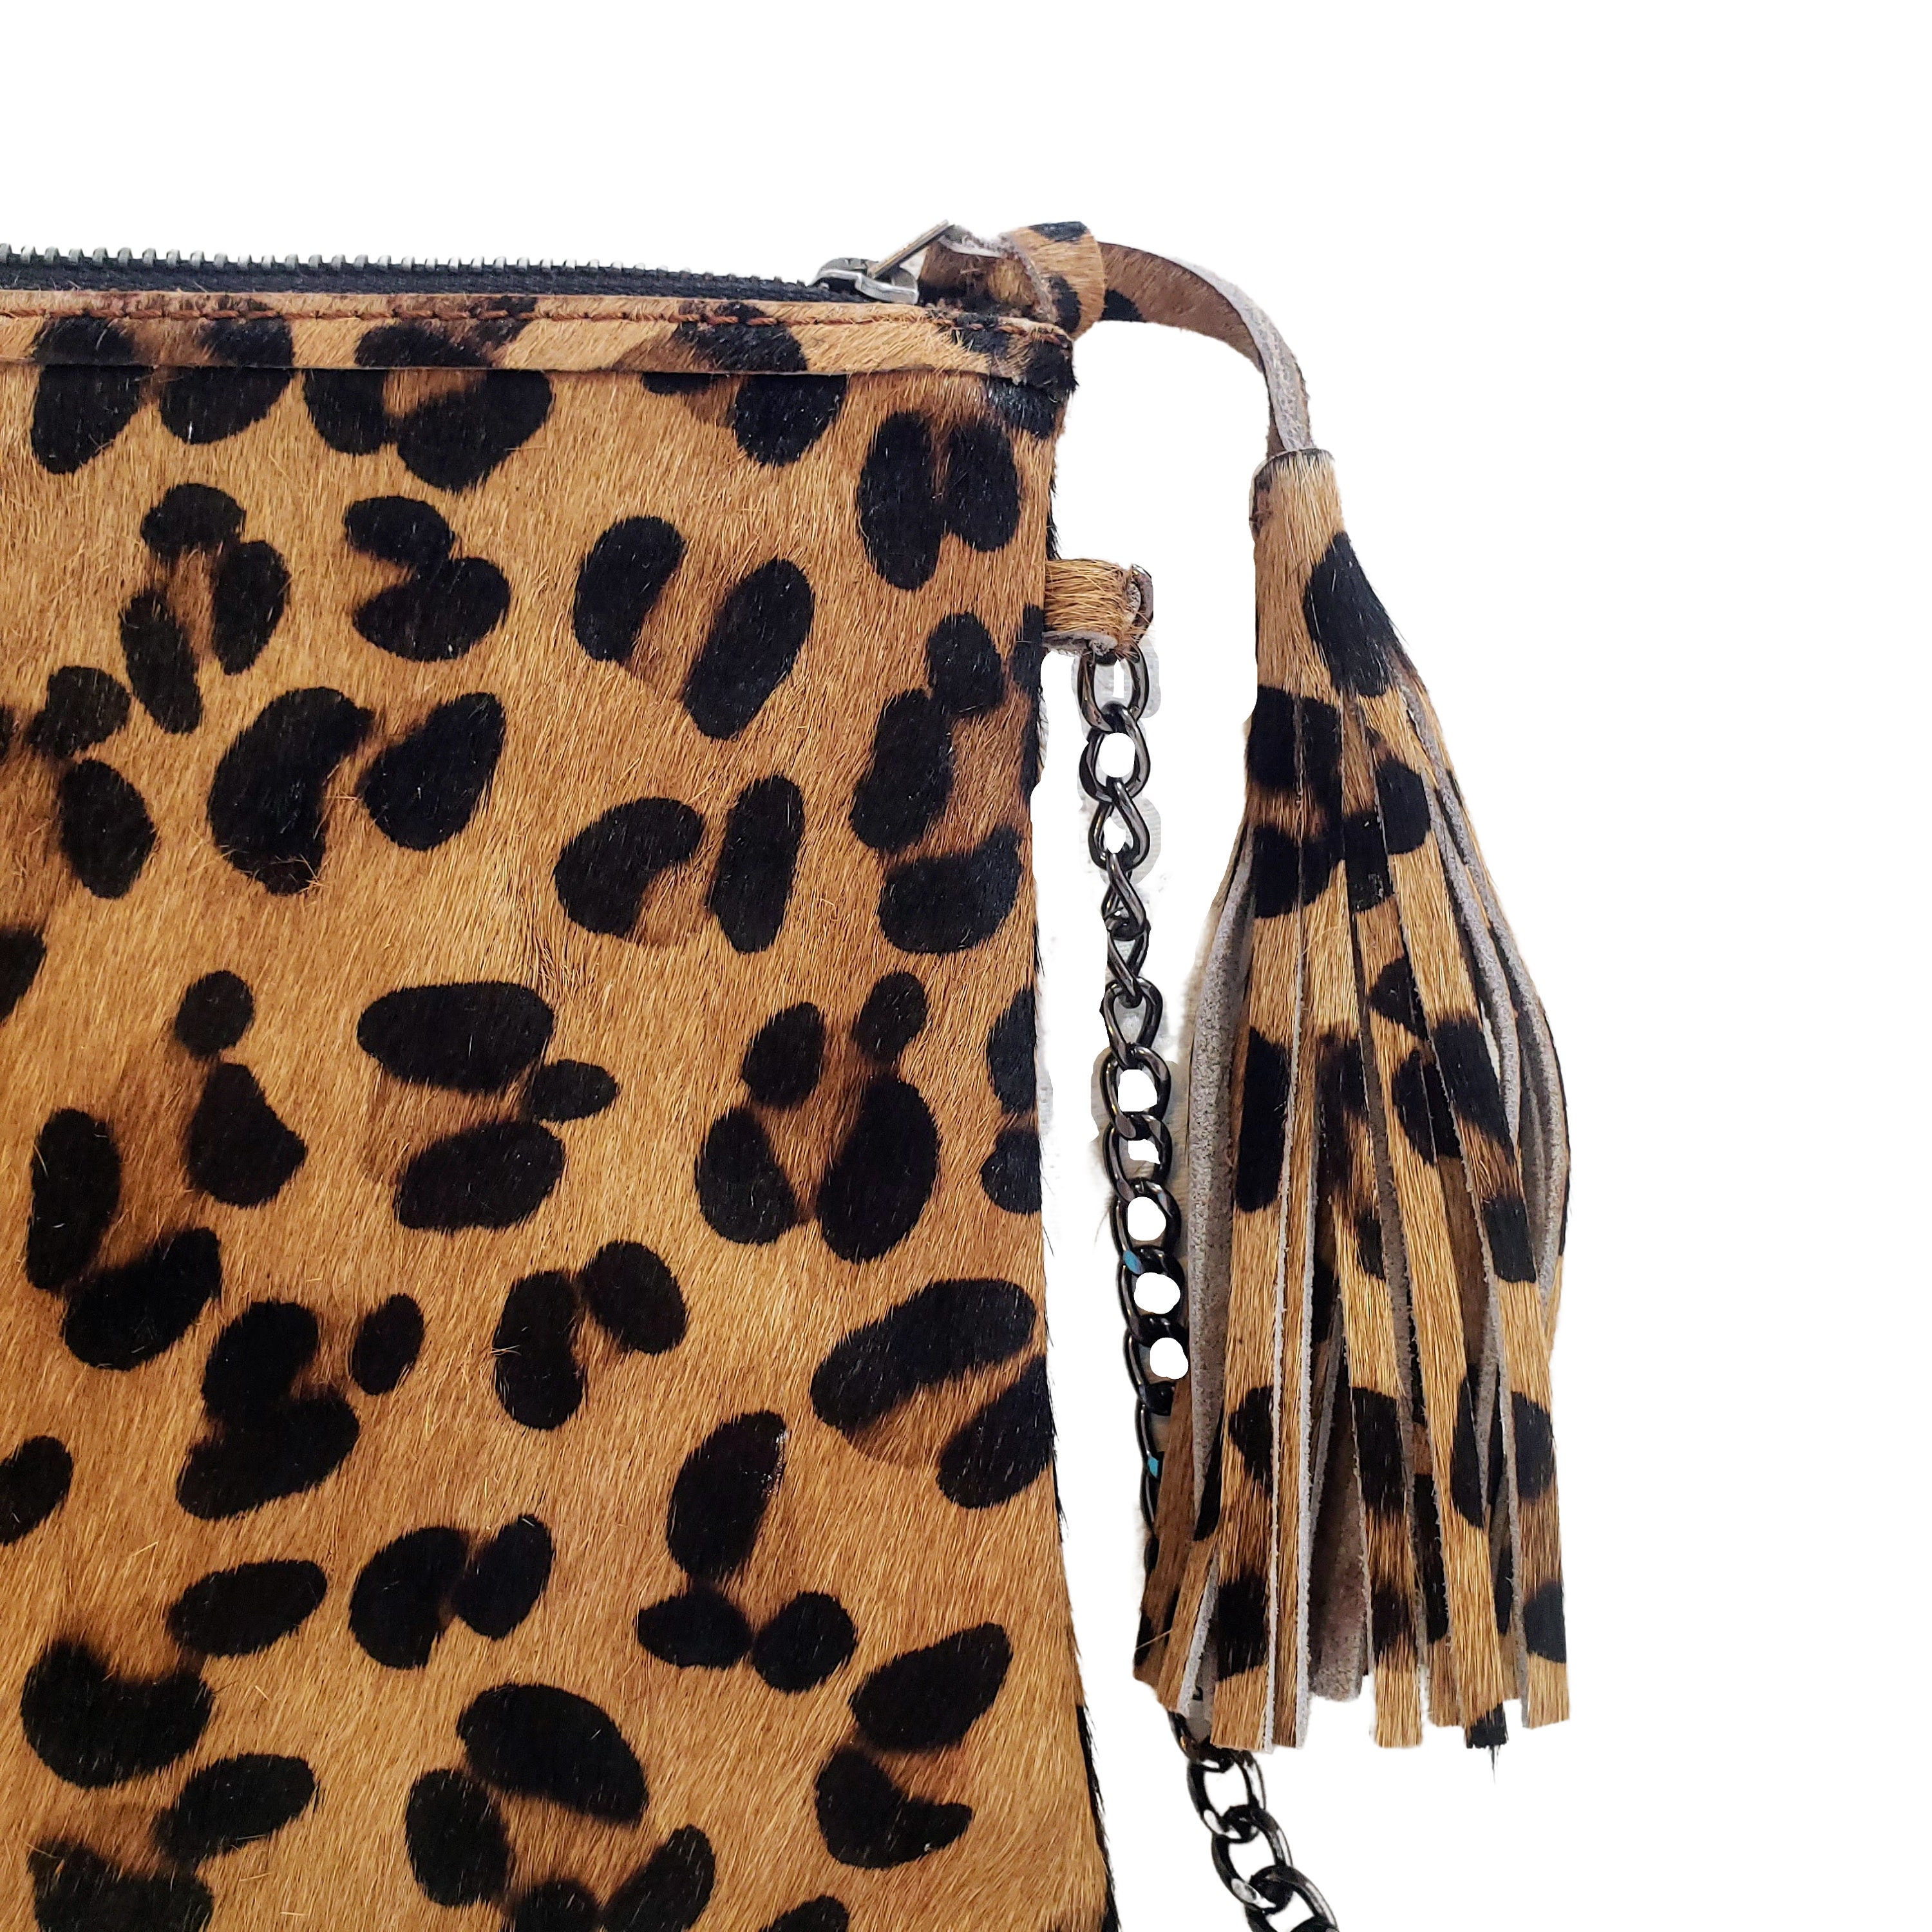 Leopard print leather crossbody bag, hair on hide small pouch bag with  chain, handmade animal print leather clutch, western wear rodeo purse